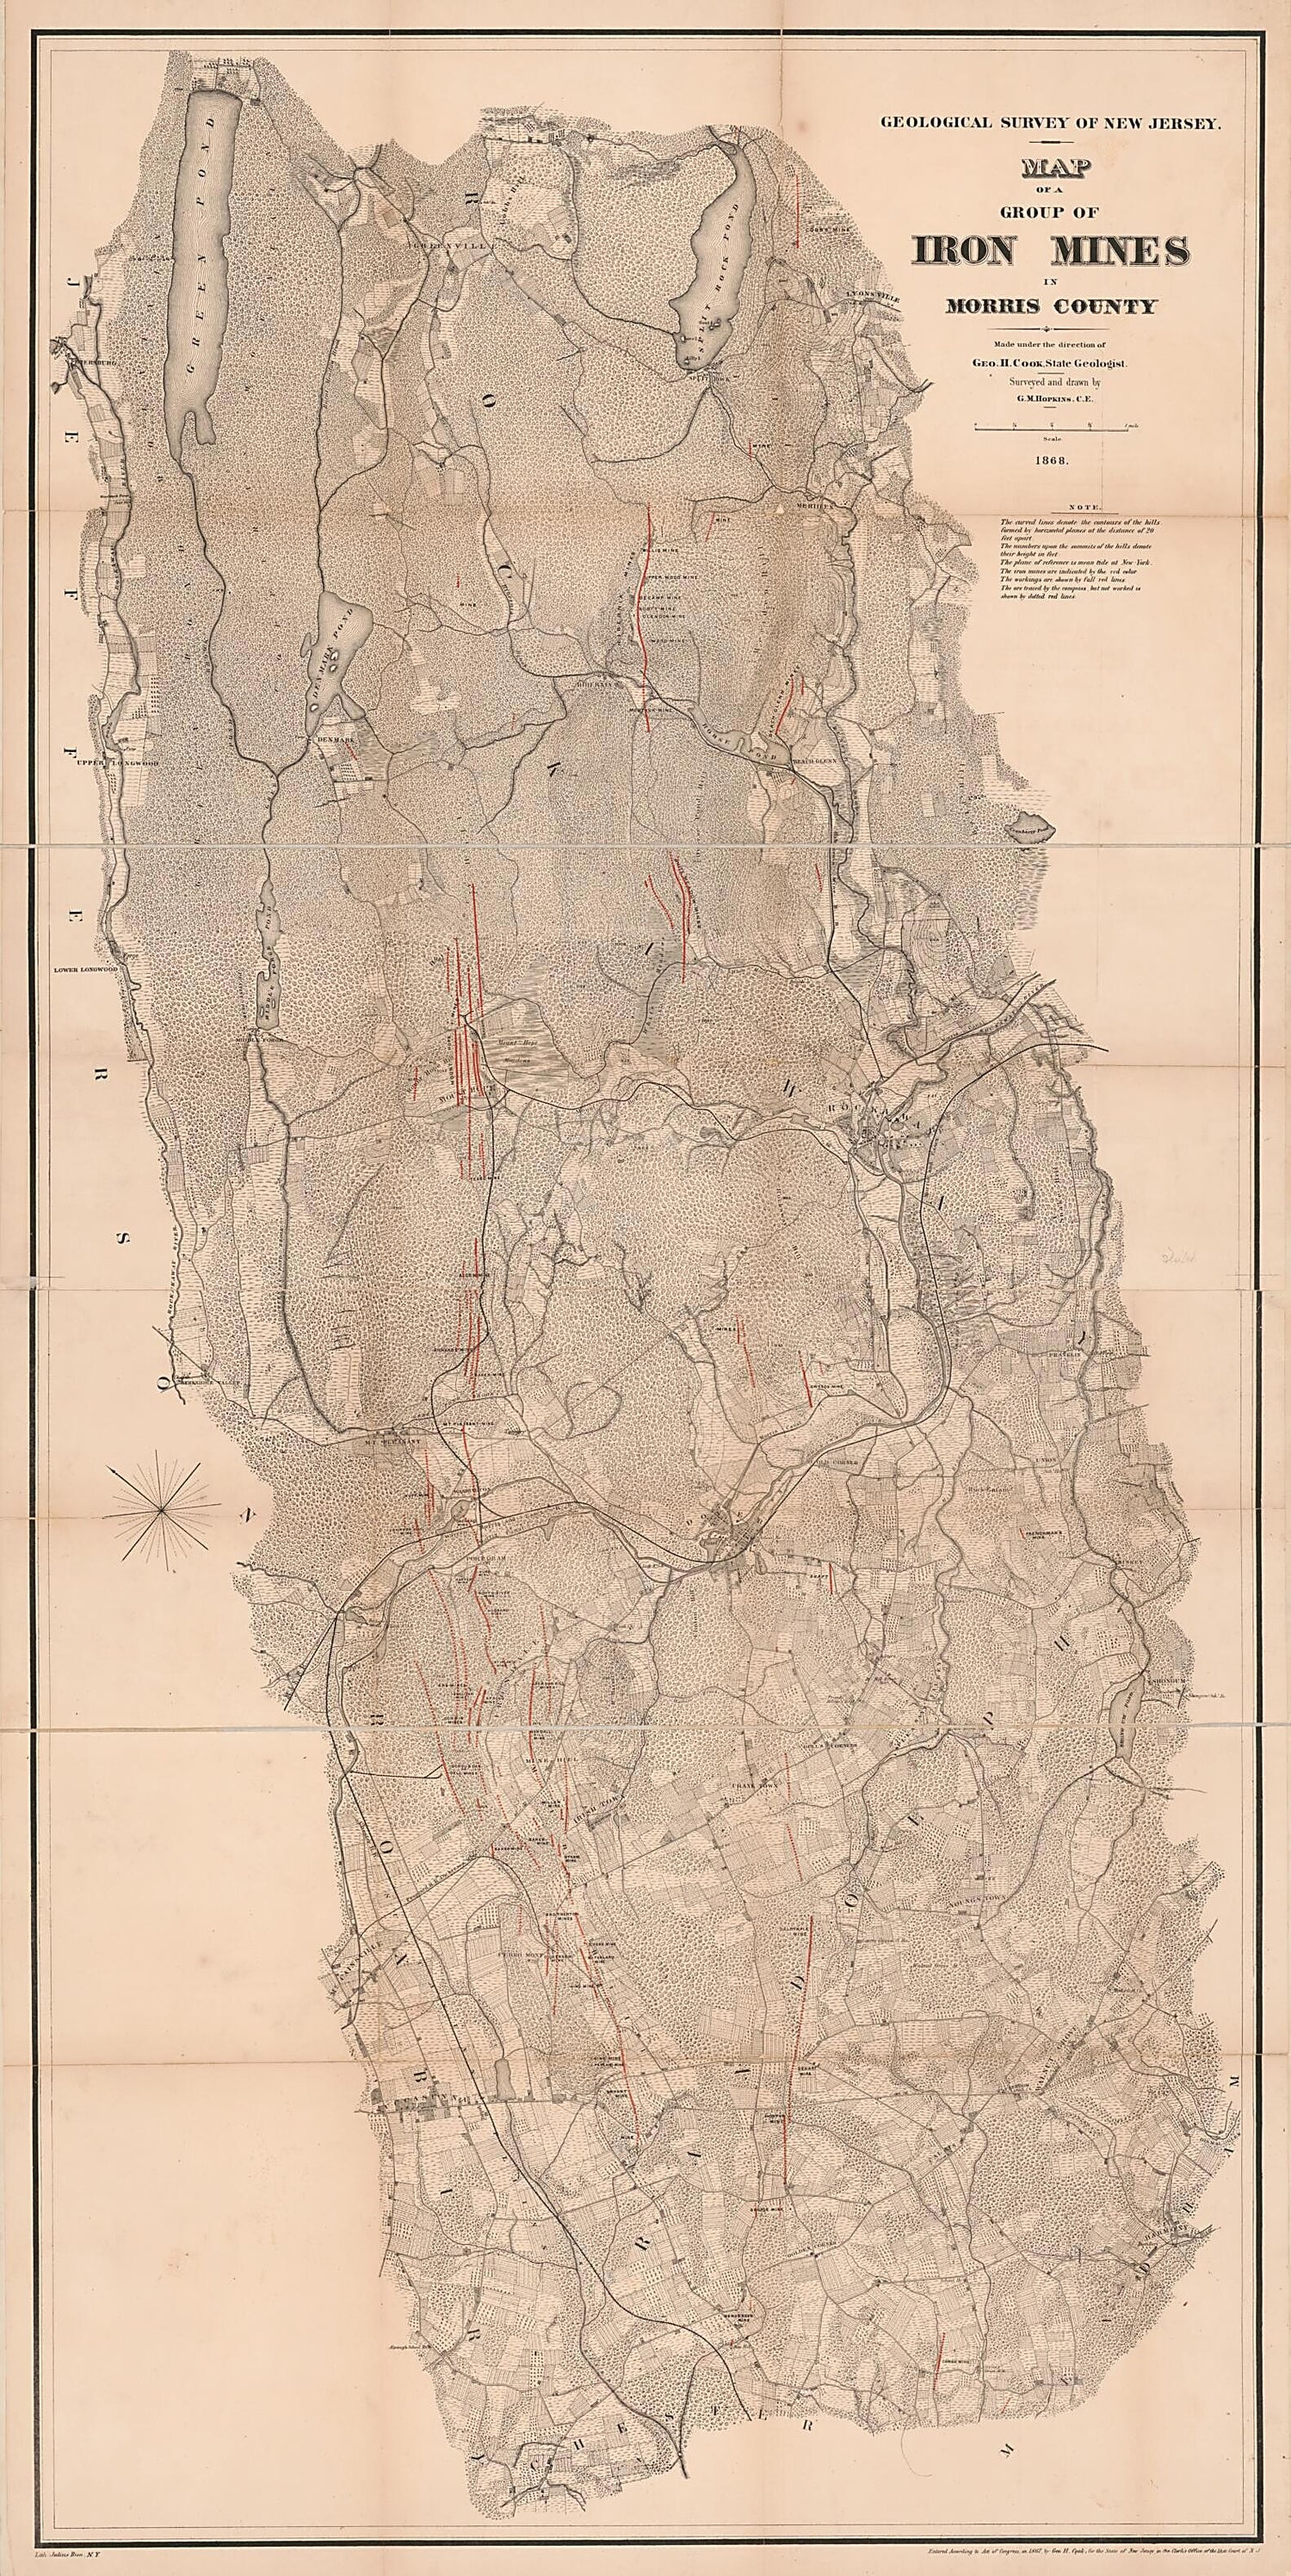 This old map of Map of a Group of Iron Mines In Morris County from 1868 was created by George Hammell Cook,  Geological Survey of New Jersey, Griffith Morgan Hopkins,  New Jersey. State Geologist in 1868